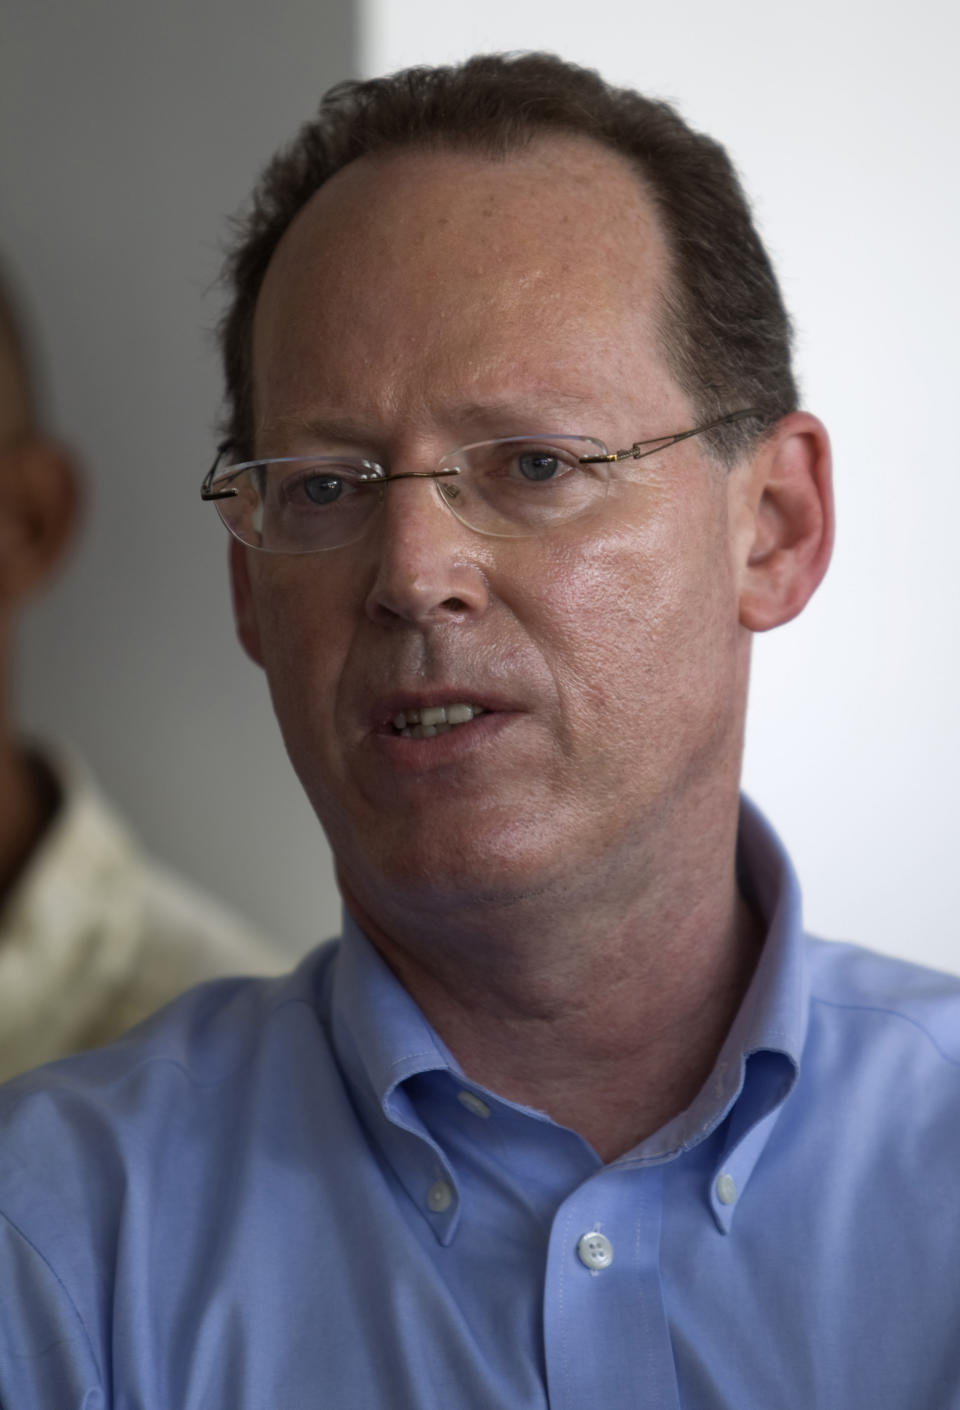 In this picture taken Jan. 10, 2012, Partners in Health's co-founder, Dr. Paul Farmer, attends the inauguration of national referral and teaching hospital in Mirebalais, 30 miles (48 kilometers) north of Port-au-Prince, Haiti. Dr. Paul Farmer, a physician, humanitarian and author renowned for providing health care to millions of impoverished people, has died. He was 62. Farmer co-founded the global nonprofit Partners in Health, which confirmed his death Monday, Feb. 21, 2022. (AP Photo/Dieu Nalio Chery, file)